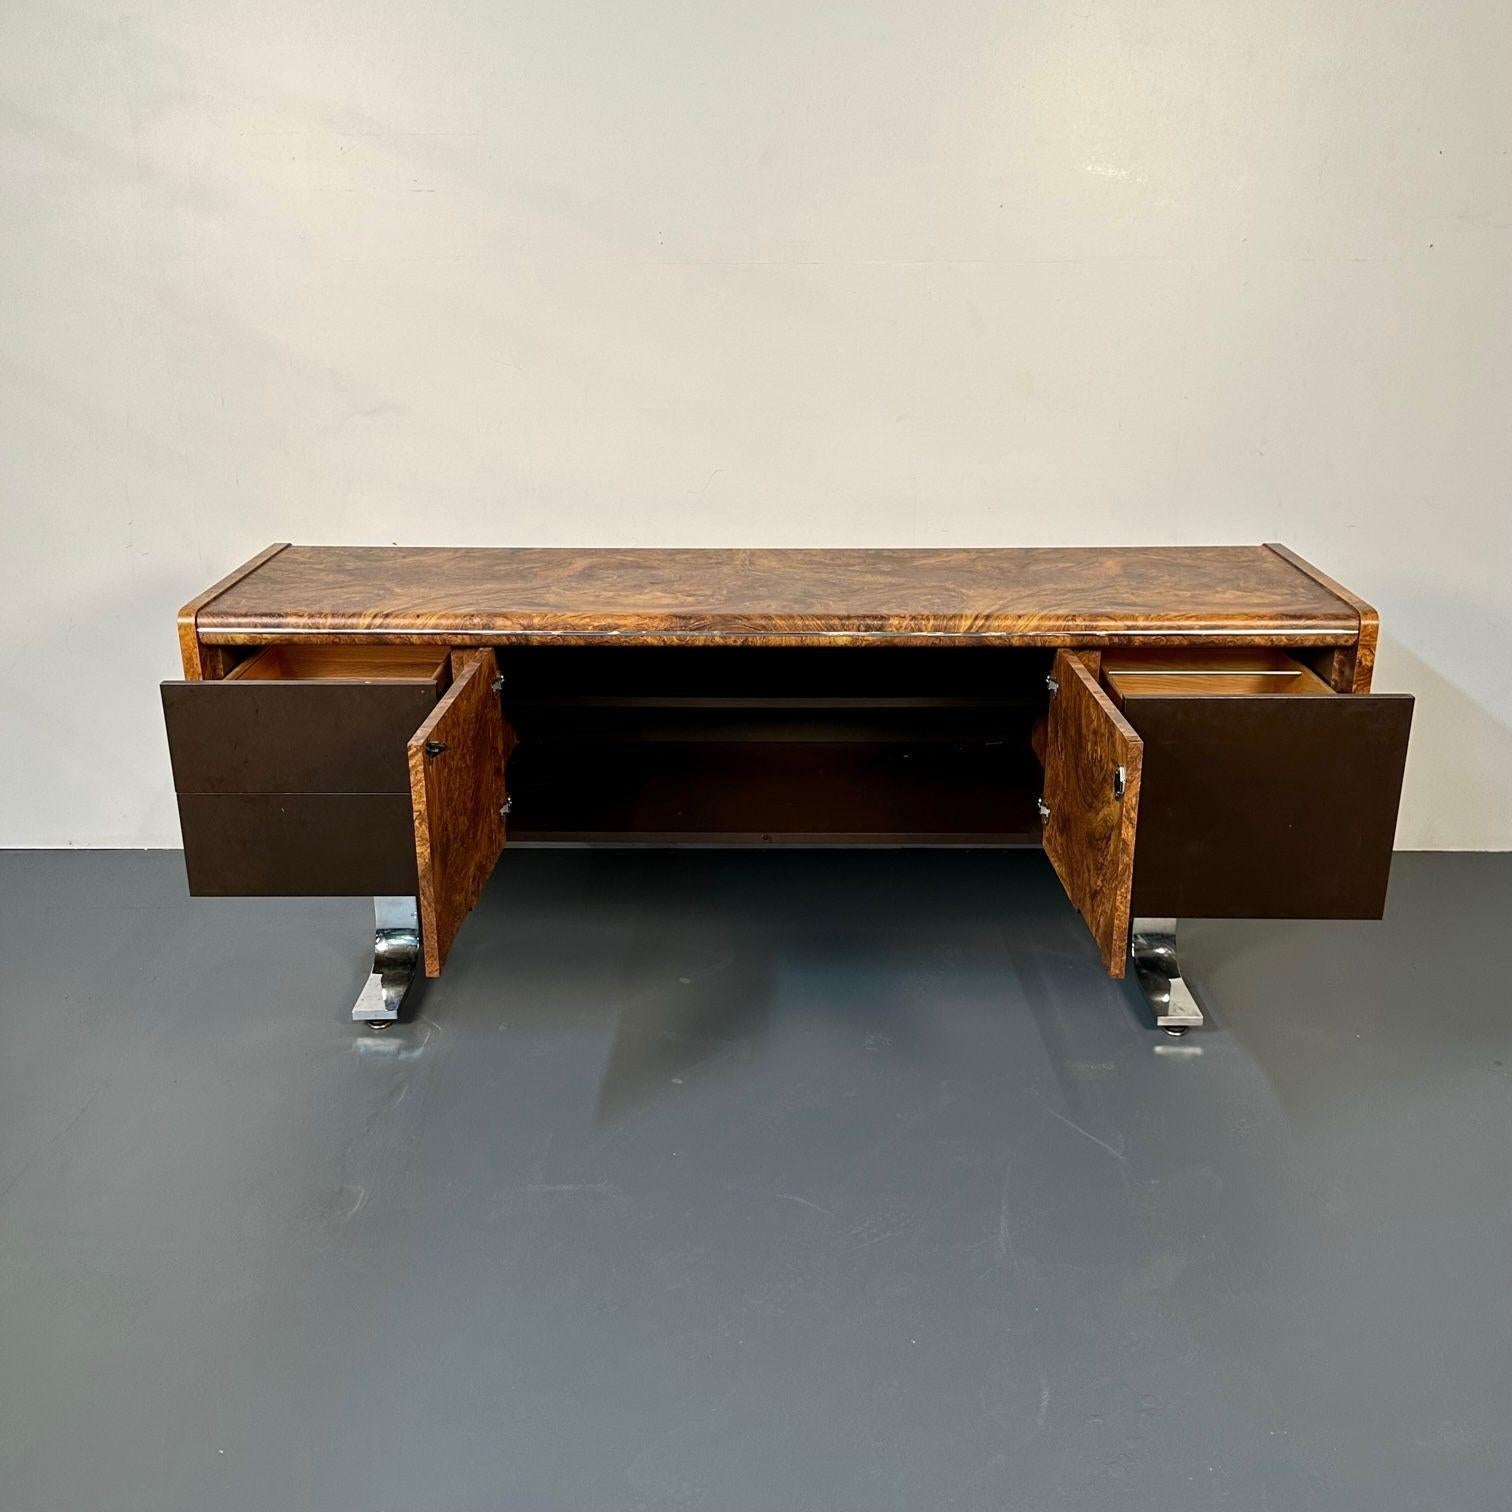 Leif Jacobsen Style, Mid-Century Modern, Credenza, Burlwood, Canada, 1950s For Sale 9